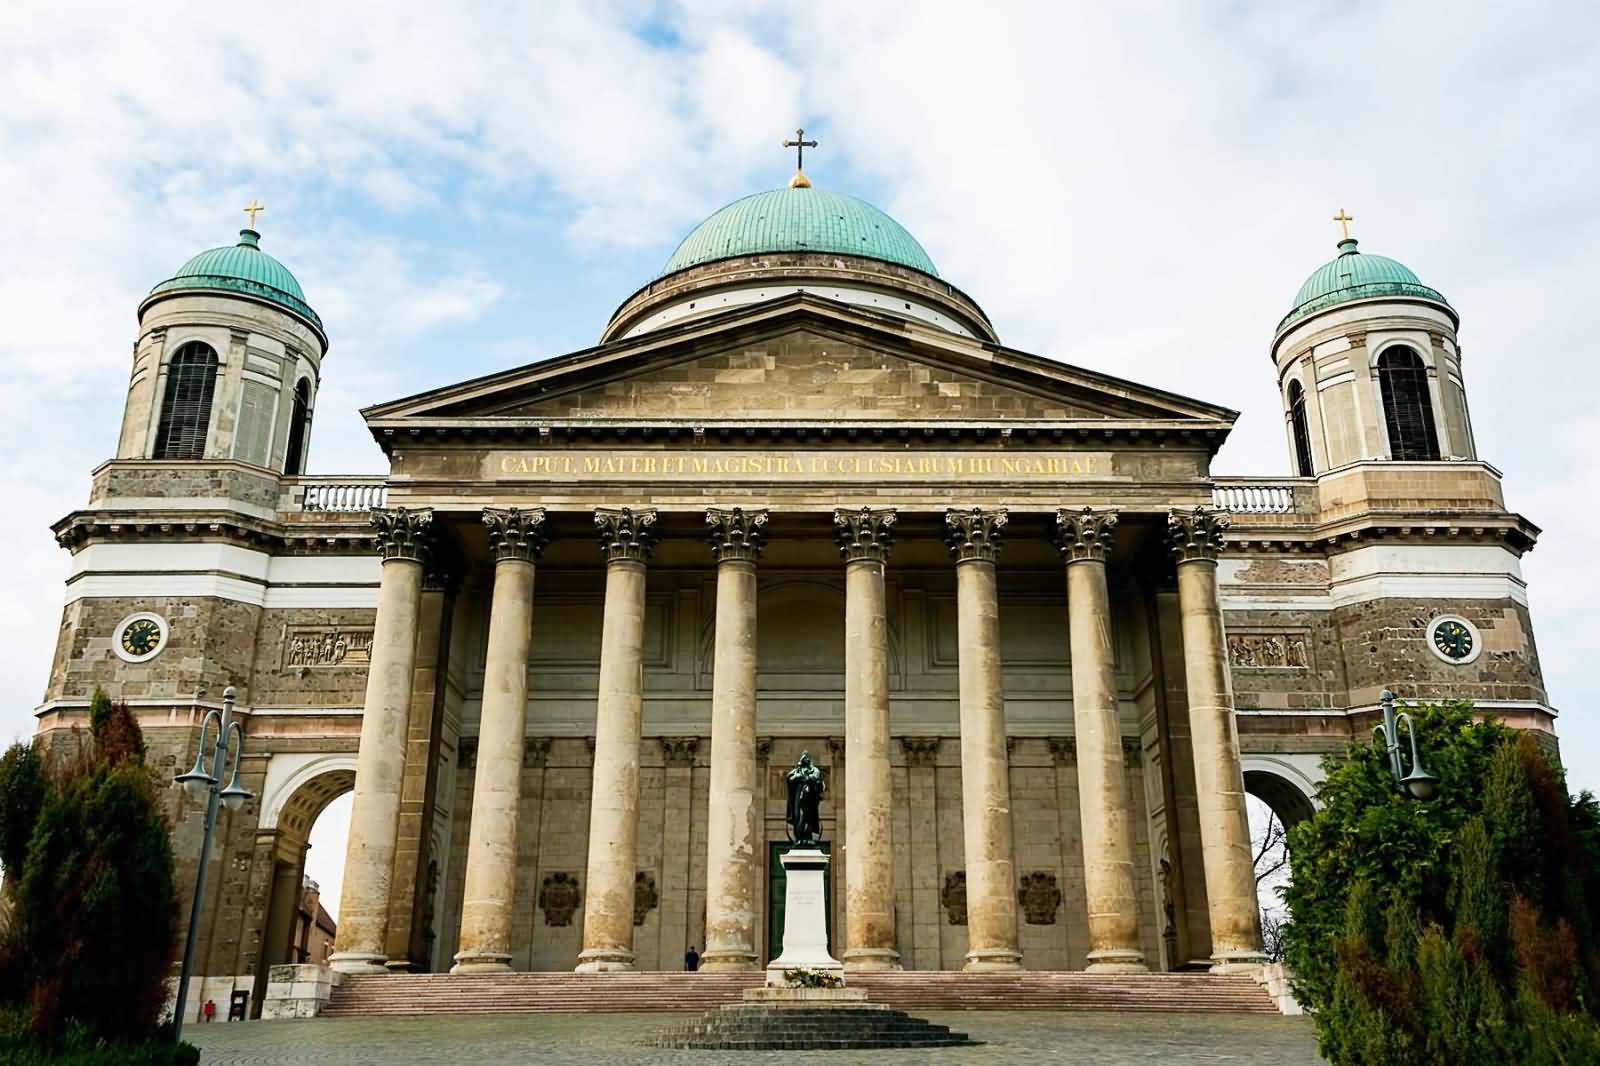 60+ Most Amazing Pictures Of The Esztergom Basilica In Hungary